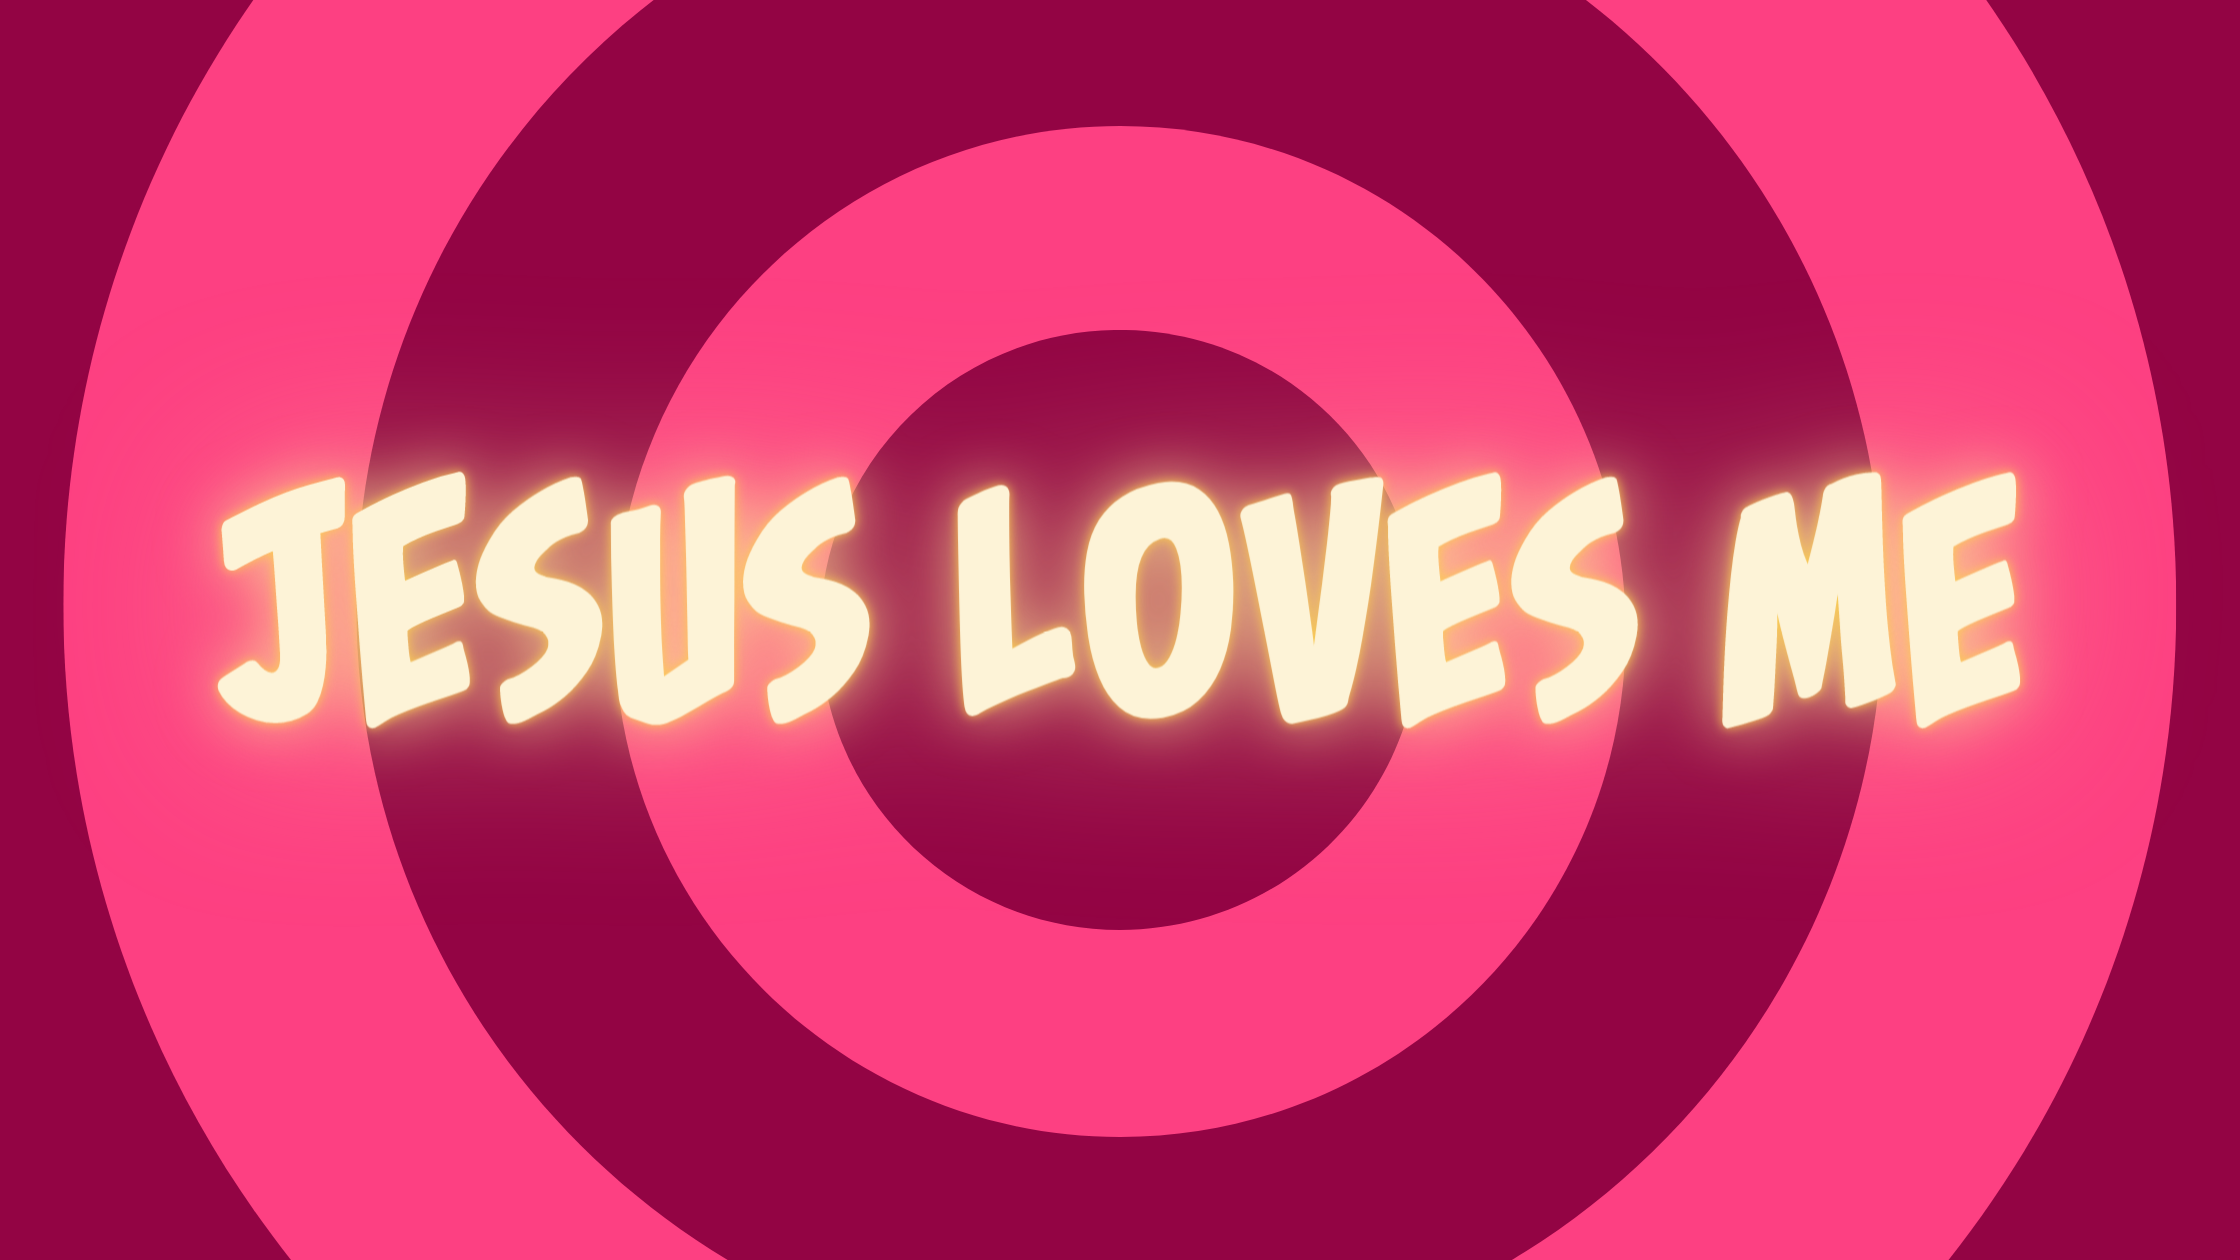 Jesus Loves You Wallpapers  Top Free Jesus Loves You Backgrounds   WallpaperAccess